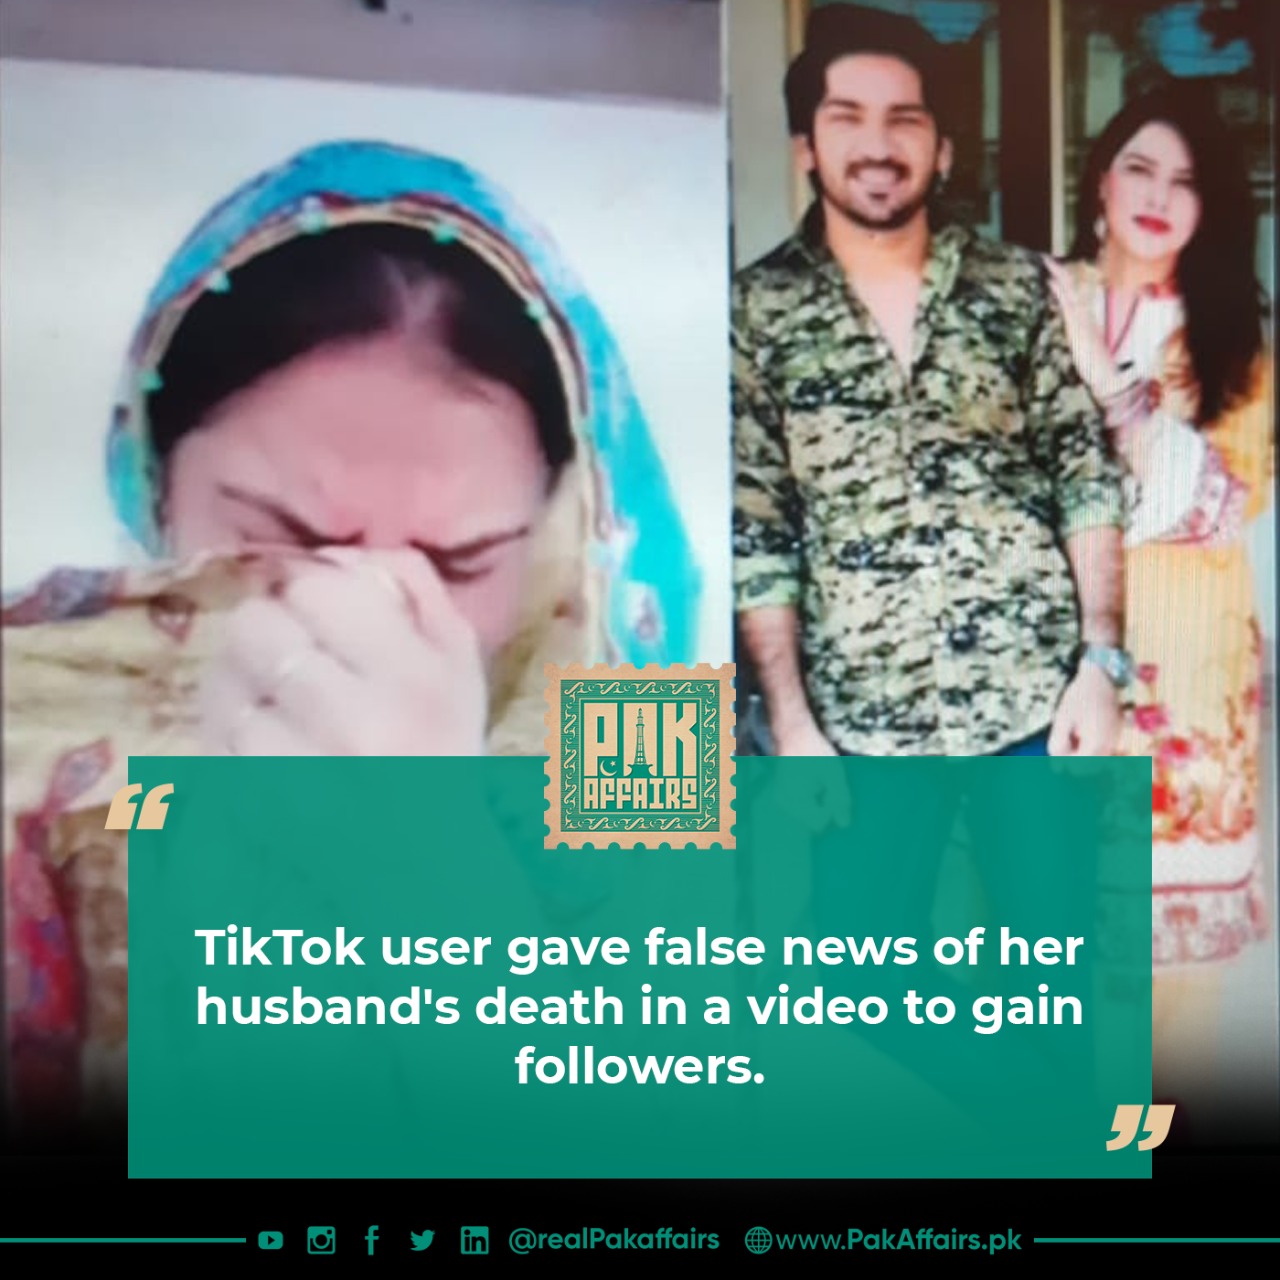 Get more followers; the woman gave false news of her husband's death on Tik Tok